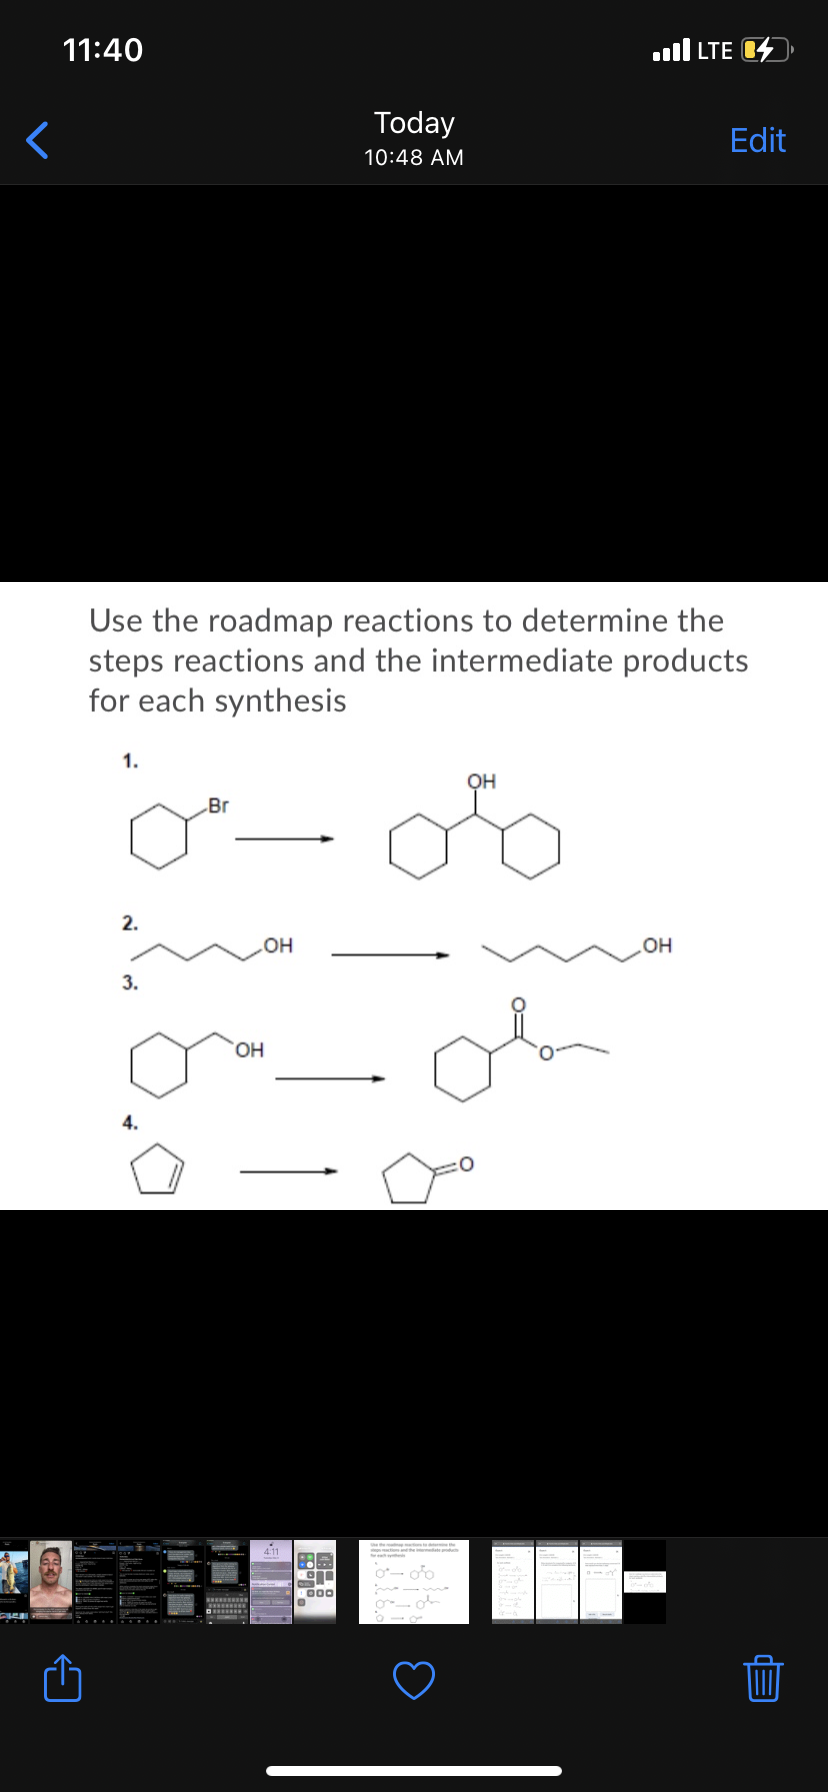 11:40
ull LTE 04
Today
Edit
10:48 AM
Use the roadmap reactions to determine the
steps reactions and the intermediate products
for each synthesis
1.
OH
Br
2.
он
HO
3.
HO,
4.
4:1
